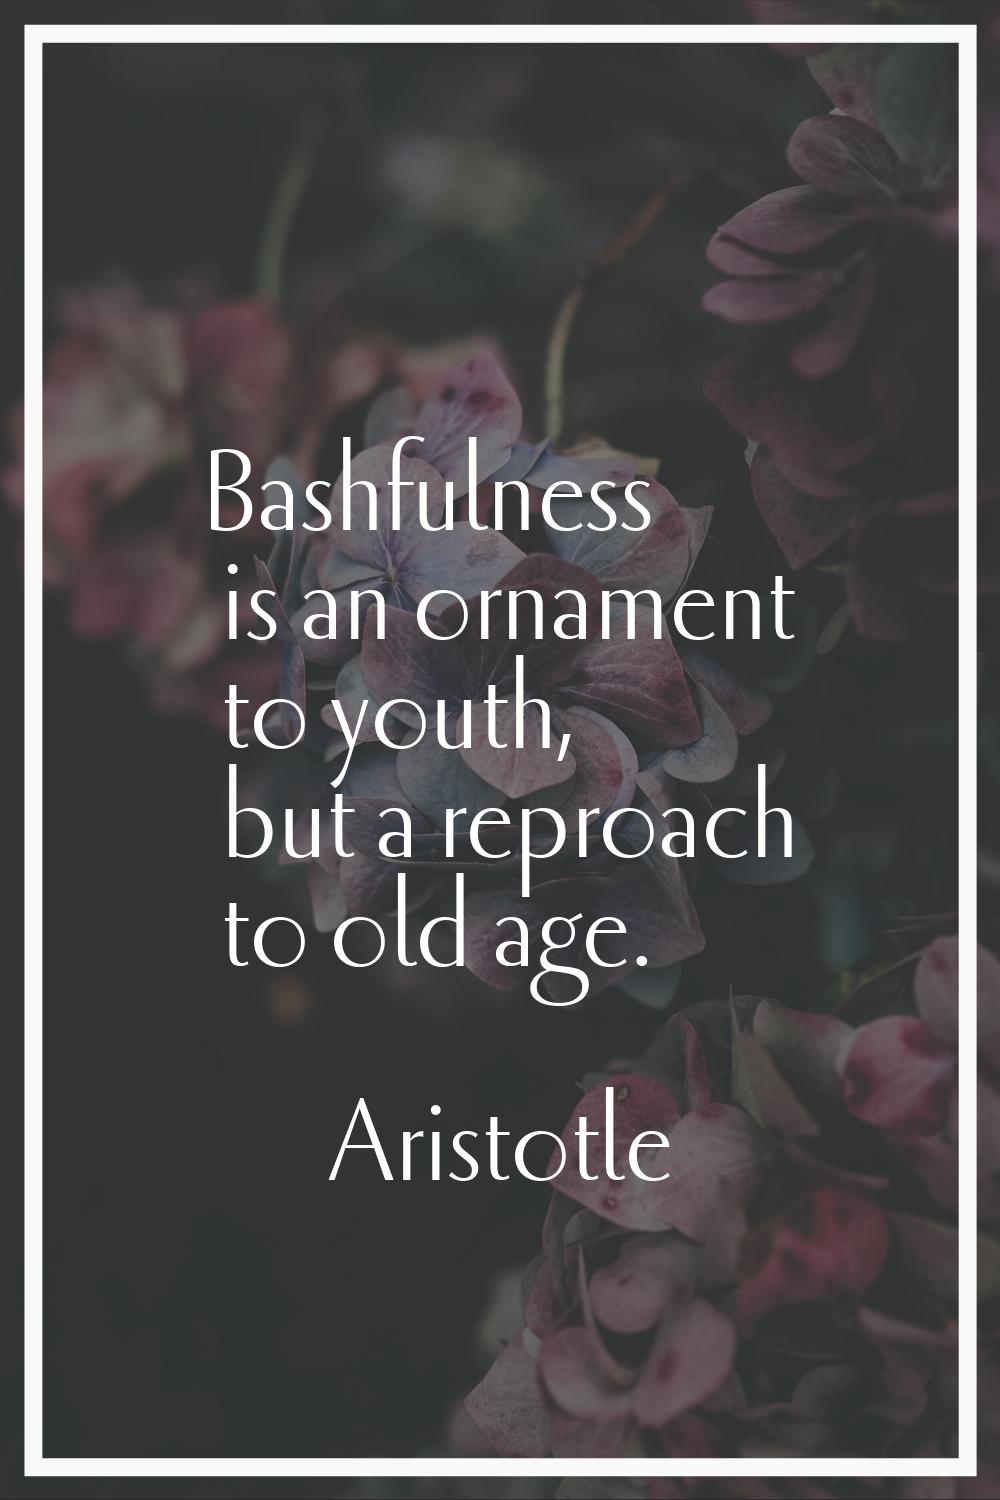 Bashfulness is an ornament to youth, but a reproach to old age.